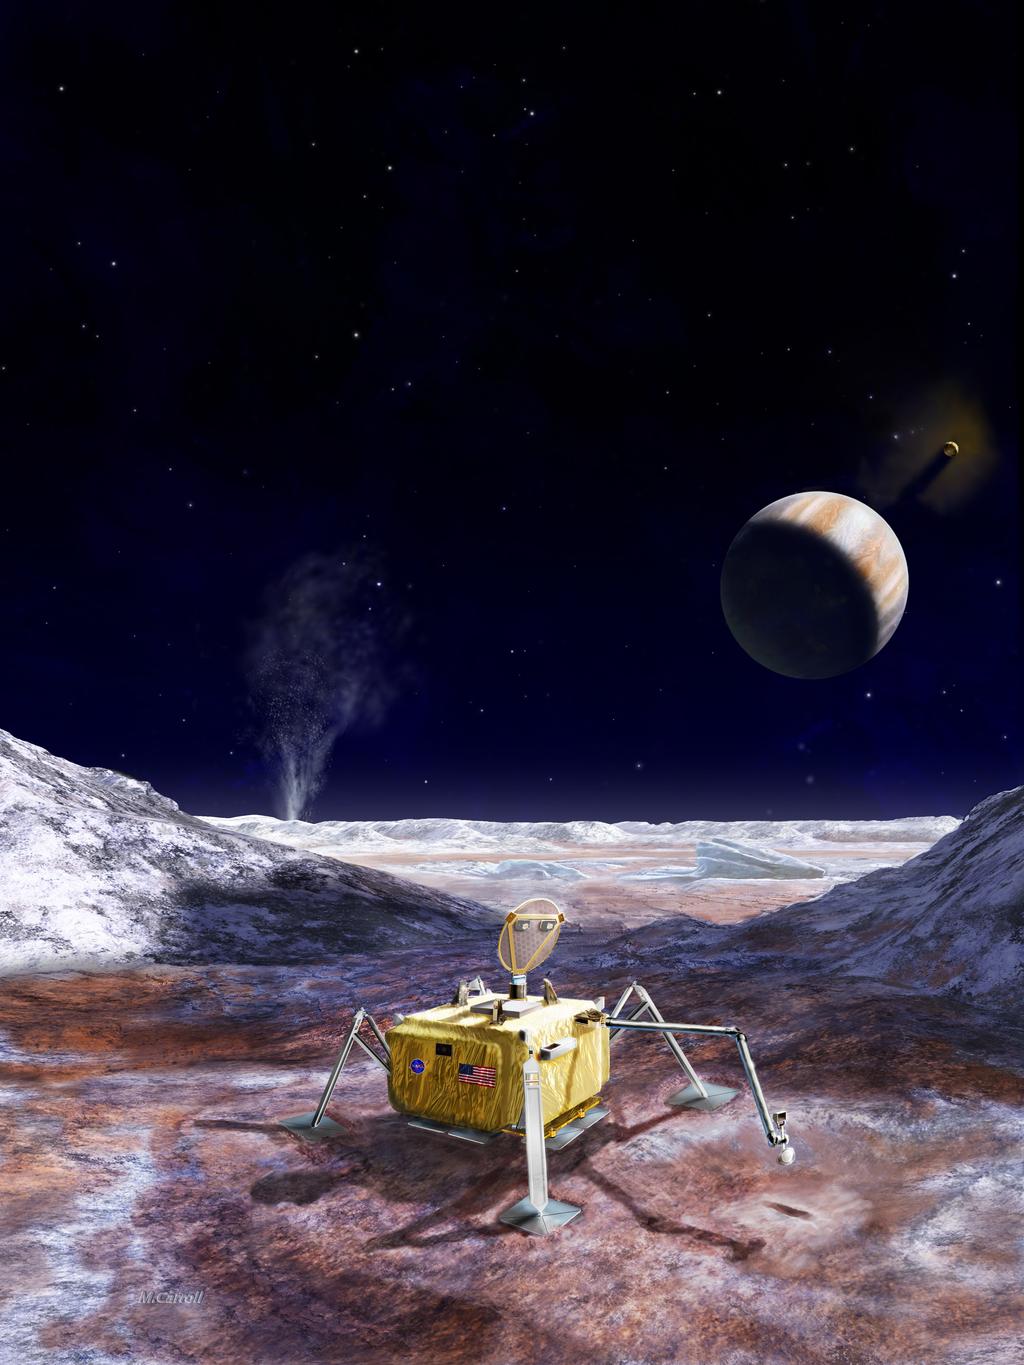 Europa Lander - Search for biosignatures on surface - Assess habitability directly - Characterize sirface for future missions Proposed